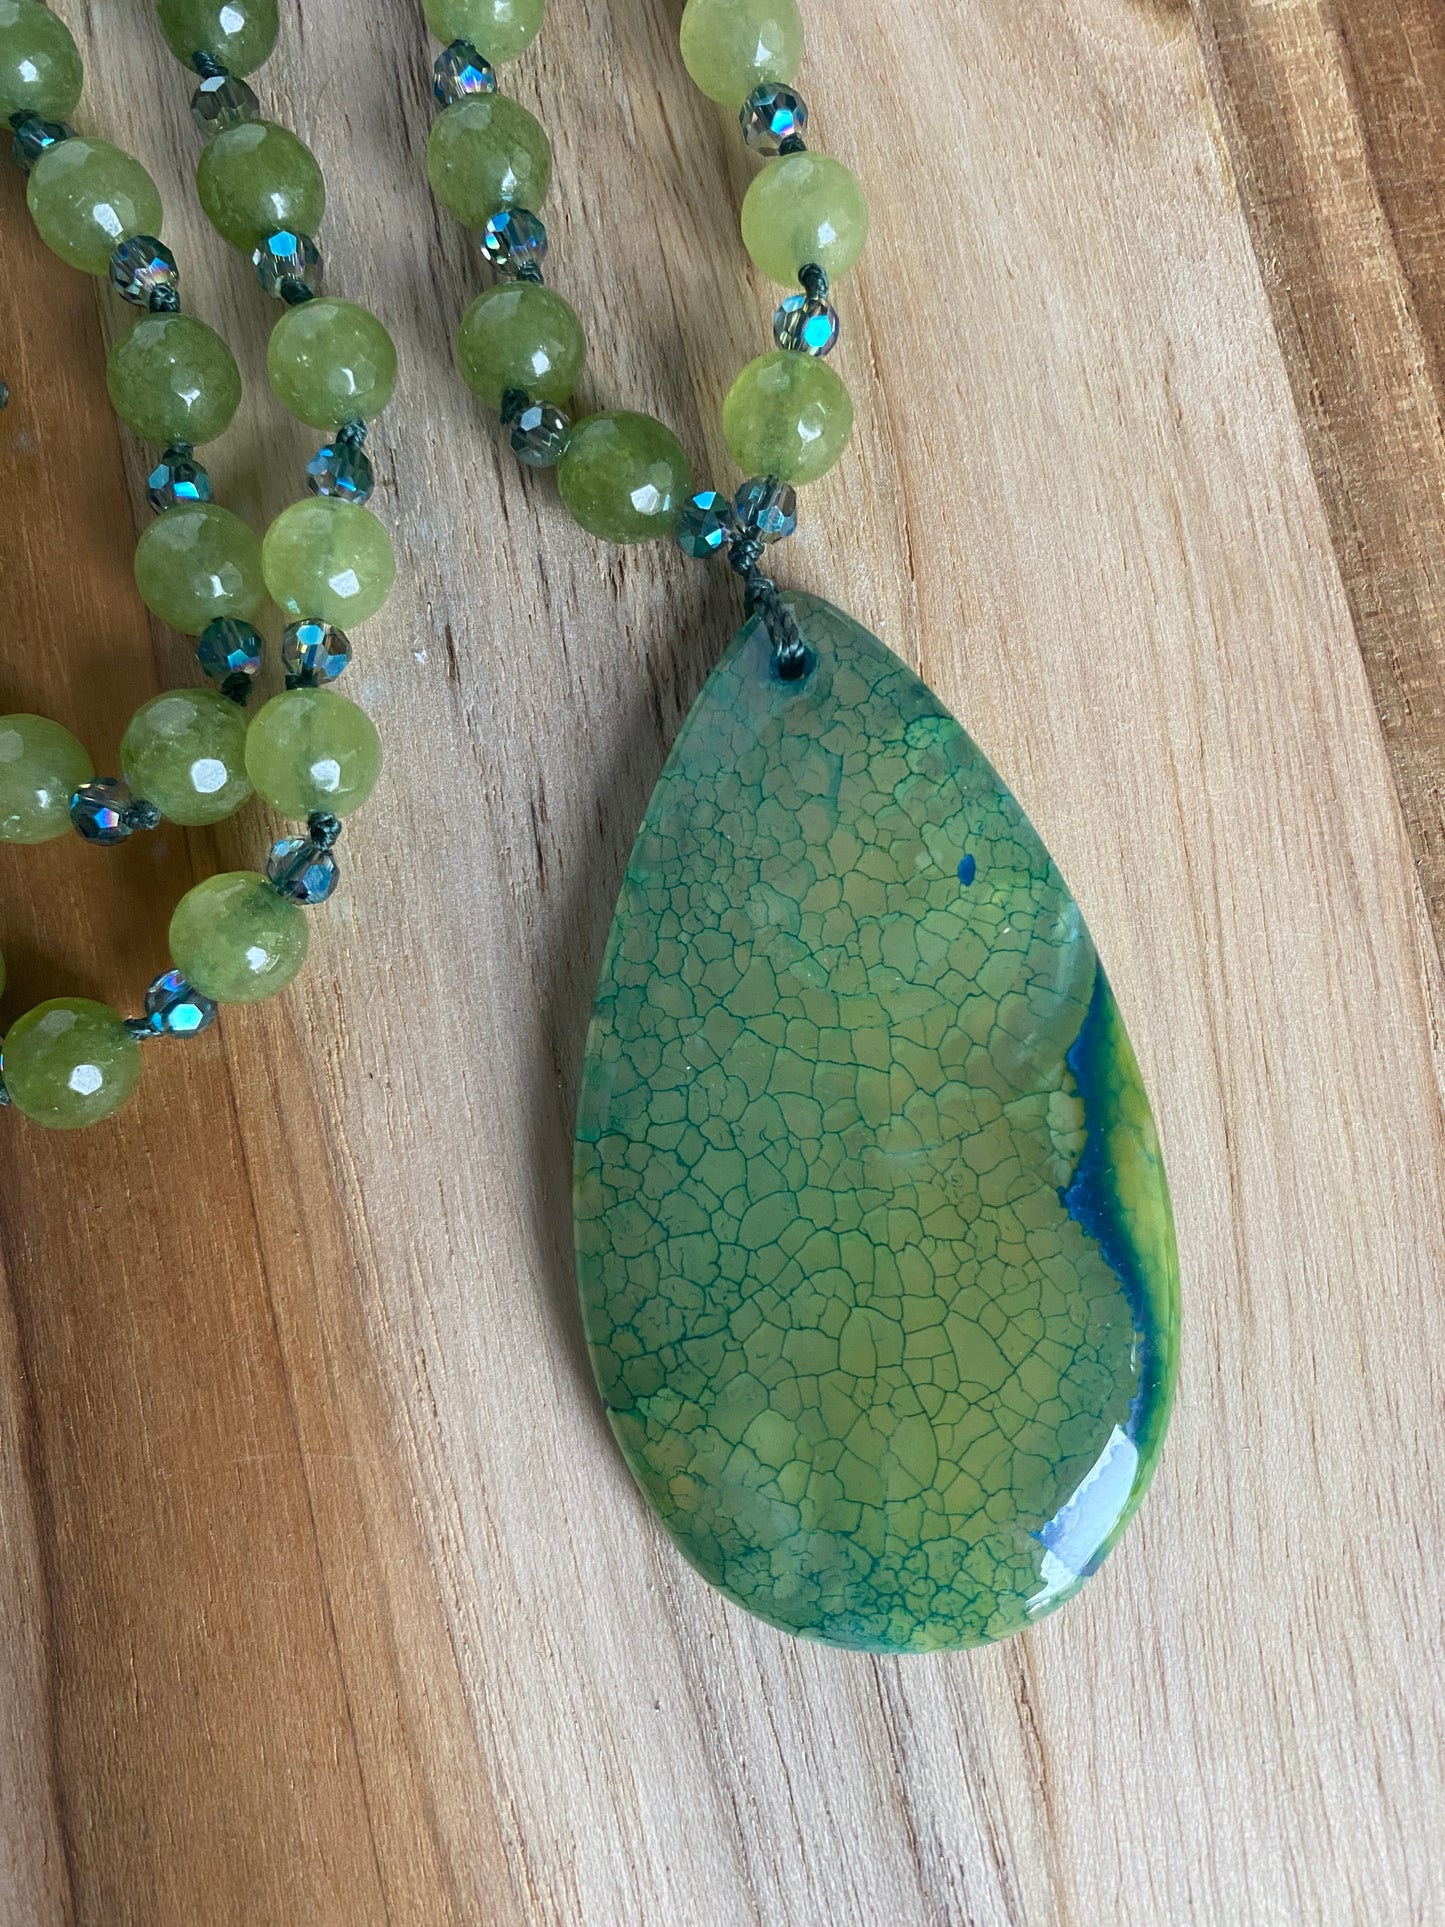 28" Long Green Dragon Vein Agate Pendant Necklace with Green Agate & Crystal Beads